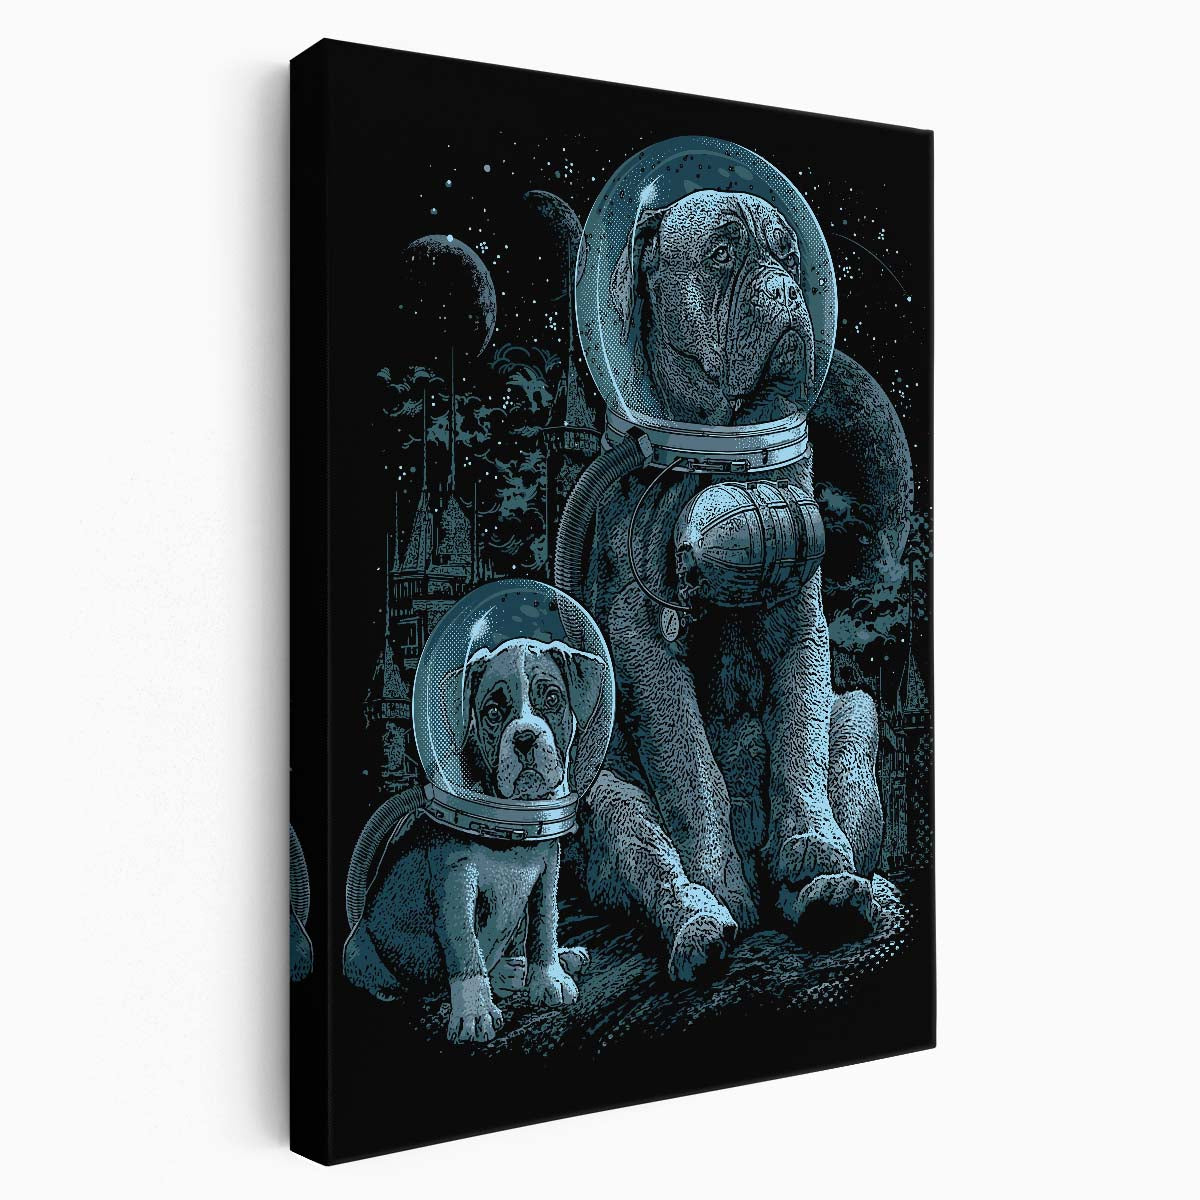 Monochrome Astronaut Dogs and Cats Space Illustration Wall Art by Luxuriance Designs, made in USA